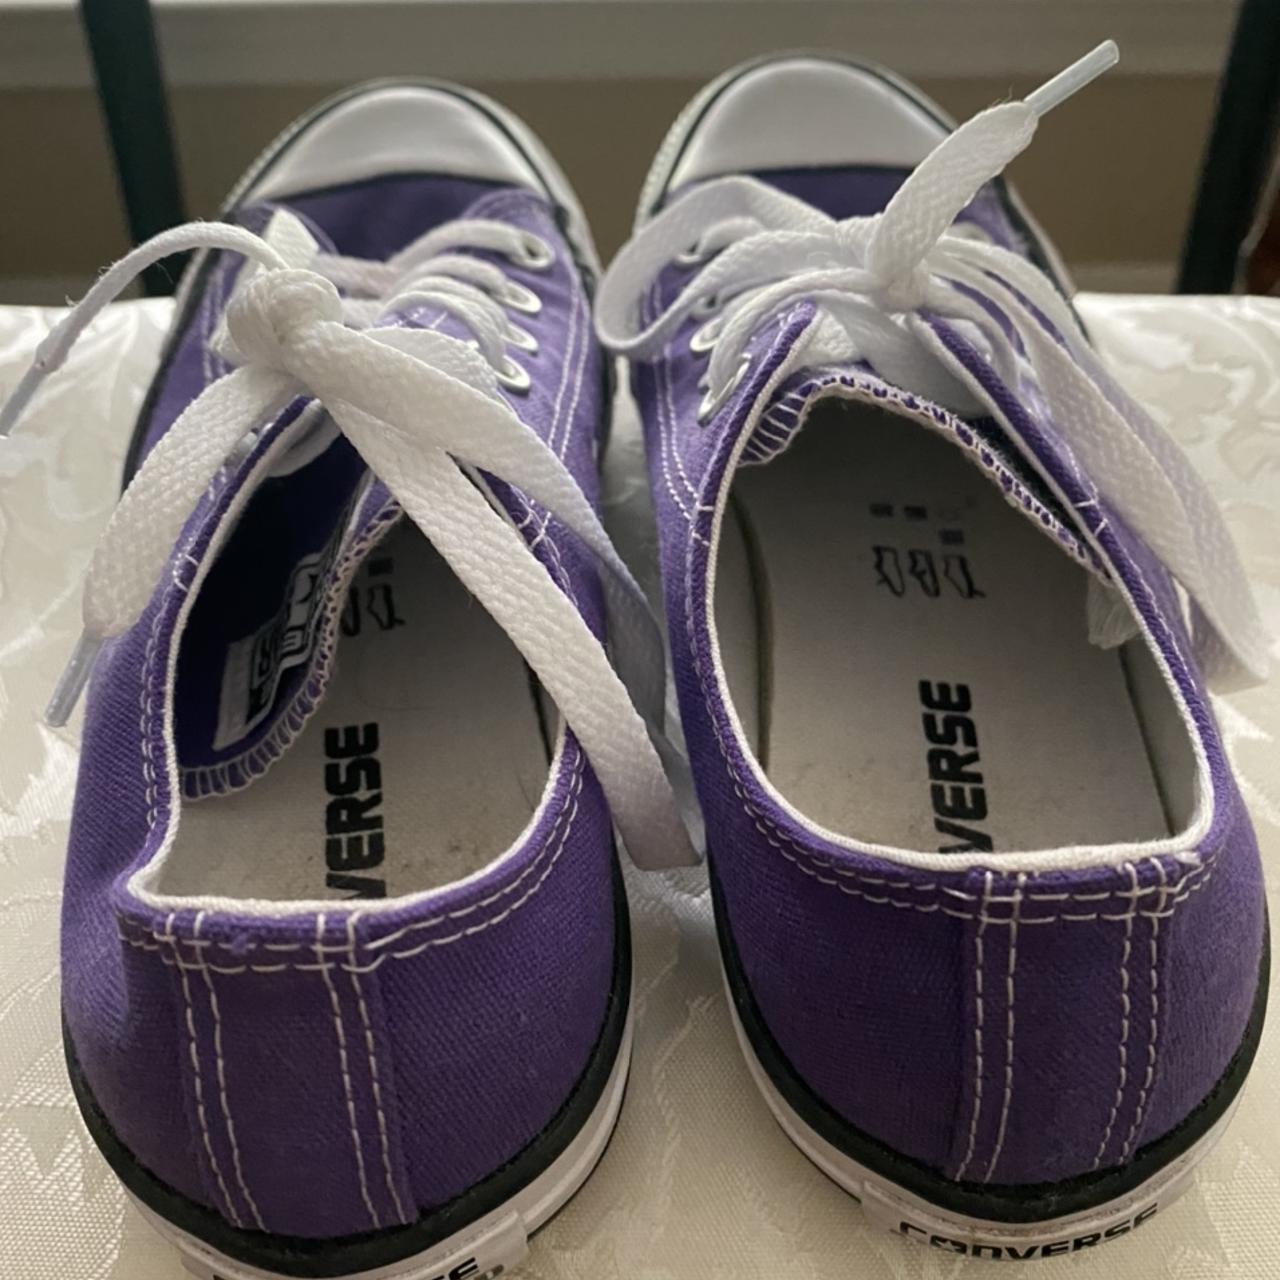 Product Image 3 - Purple Converse!!! Omg these are